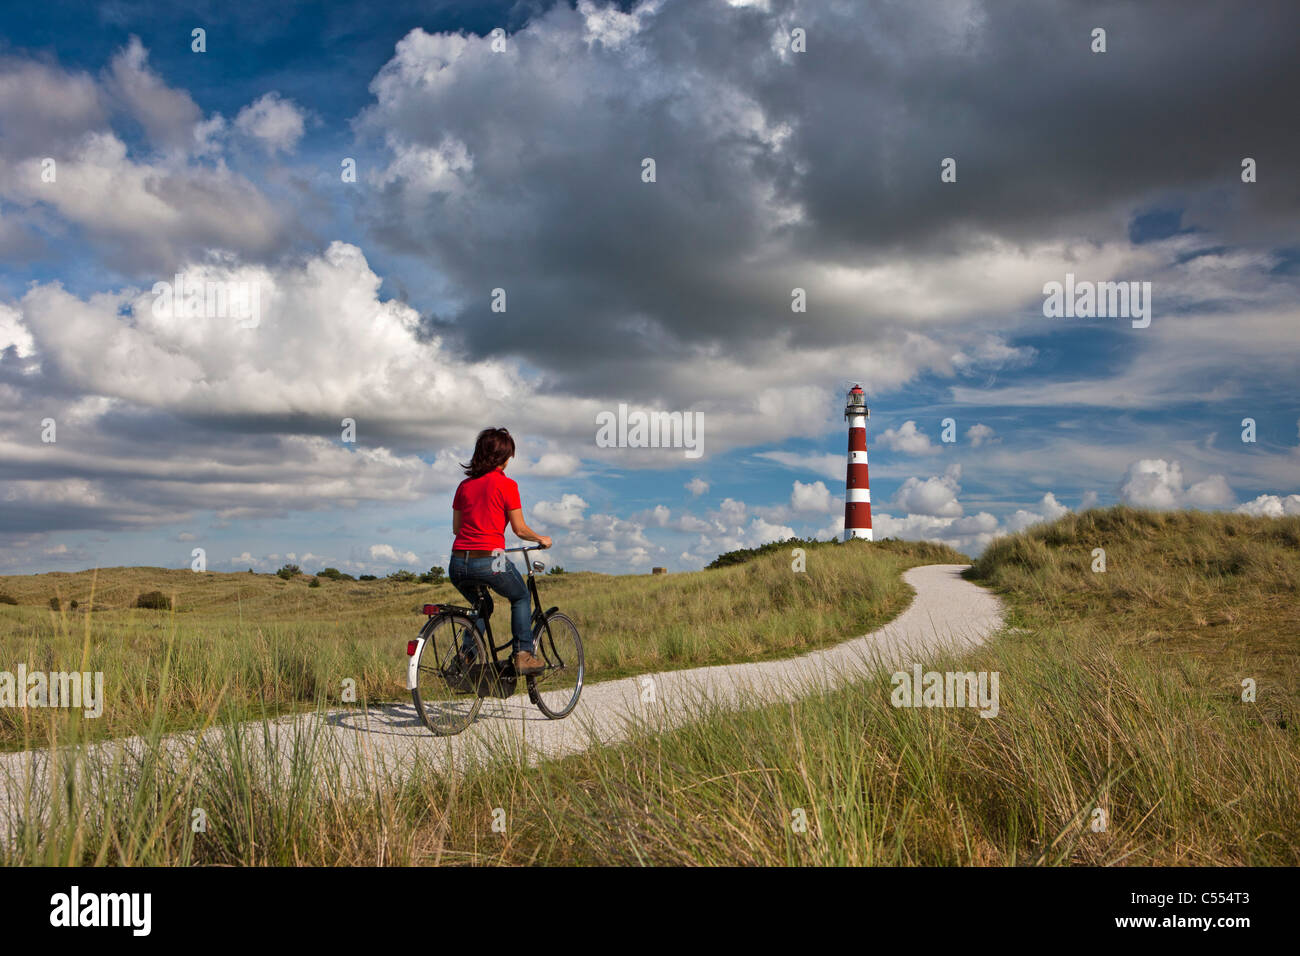 The Netherlands, Hollum, Ameland Island. Woman on bicycle on beach road. Lighthouse. Stock Photo